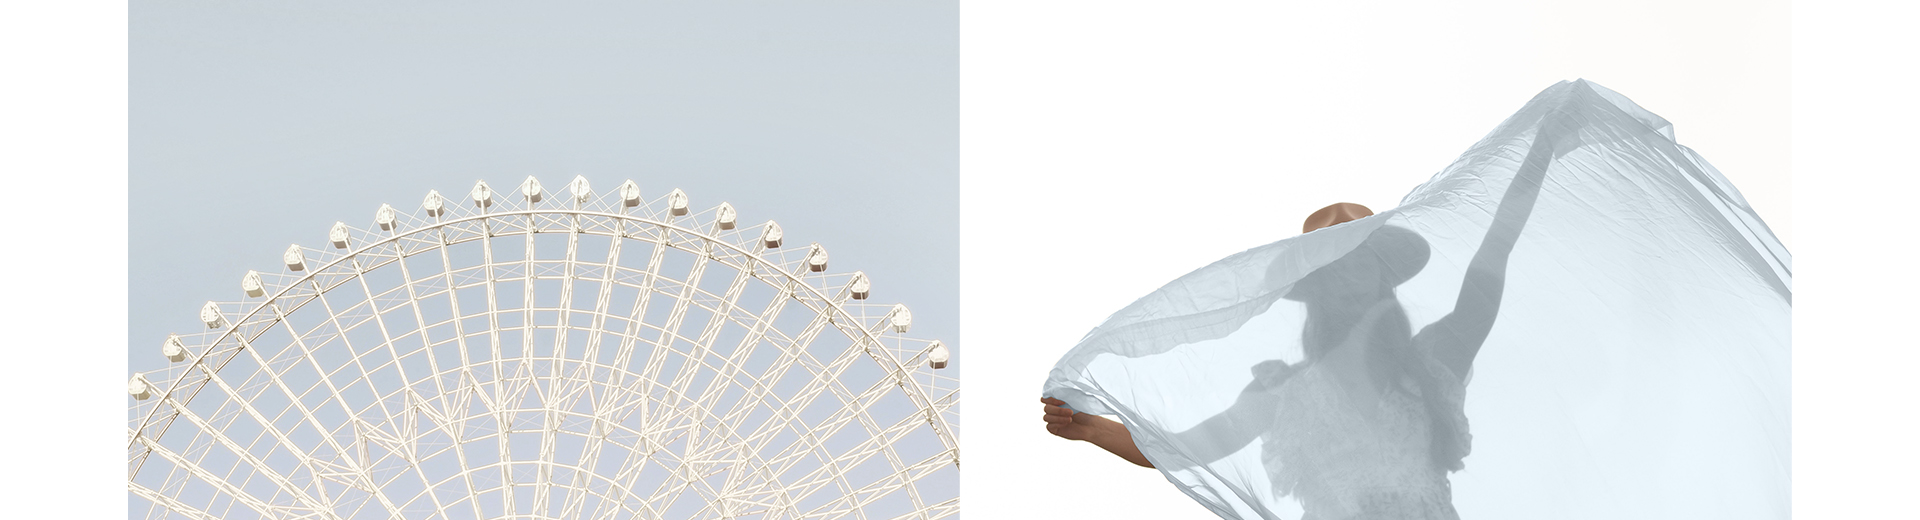 First image: Large Ferris wheel against a pale blue-gray sky. Second image: Woman in a hat silhouetted in front of a bright daytime sky and obscured behind a sheer light blue-gray fabric.